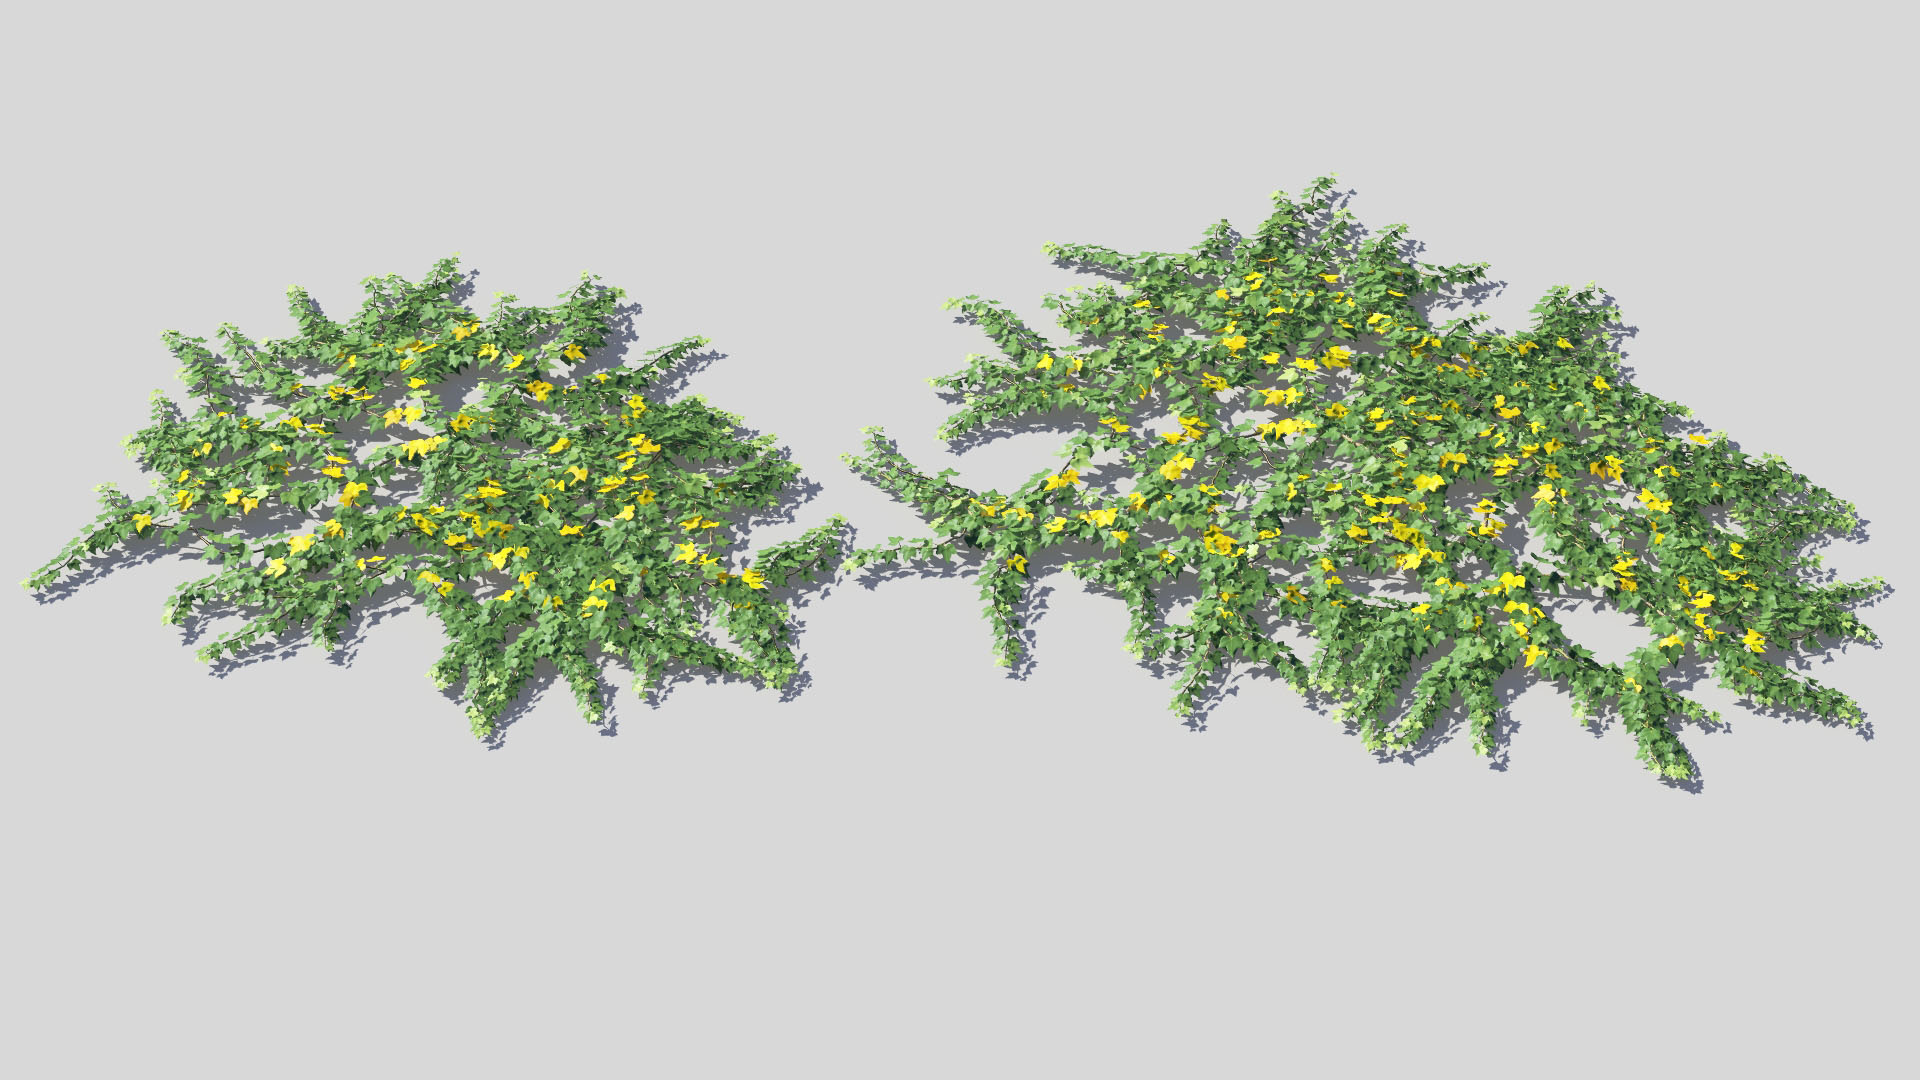 3D model of the Green ivy ground cover Hedera helix ground cover green